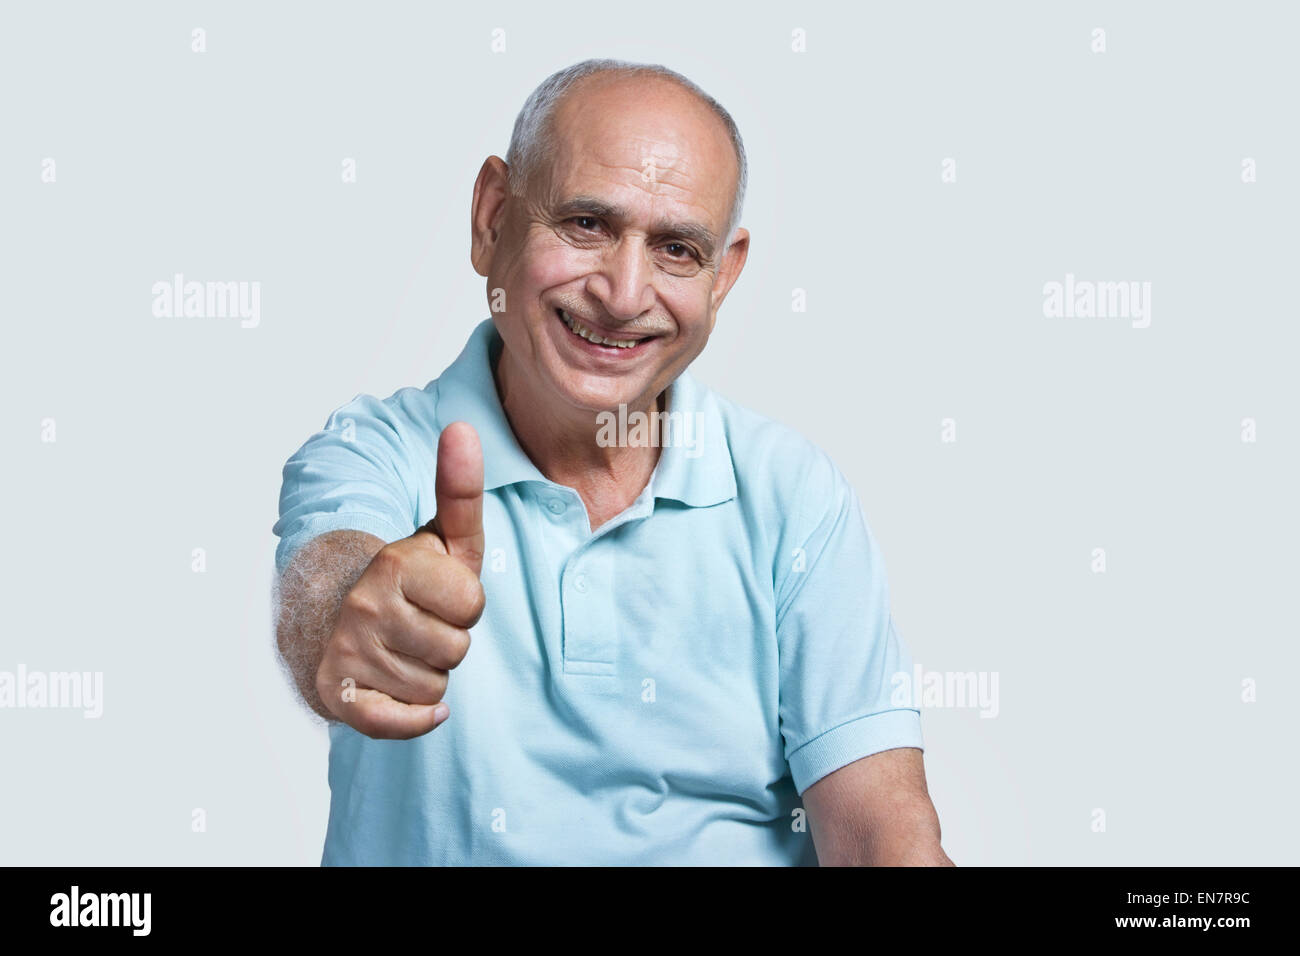 Old man giving thumbs up Stock Photo